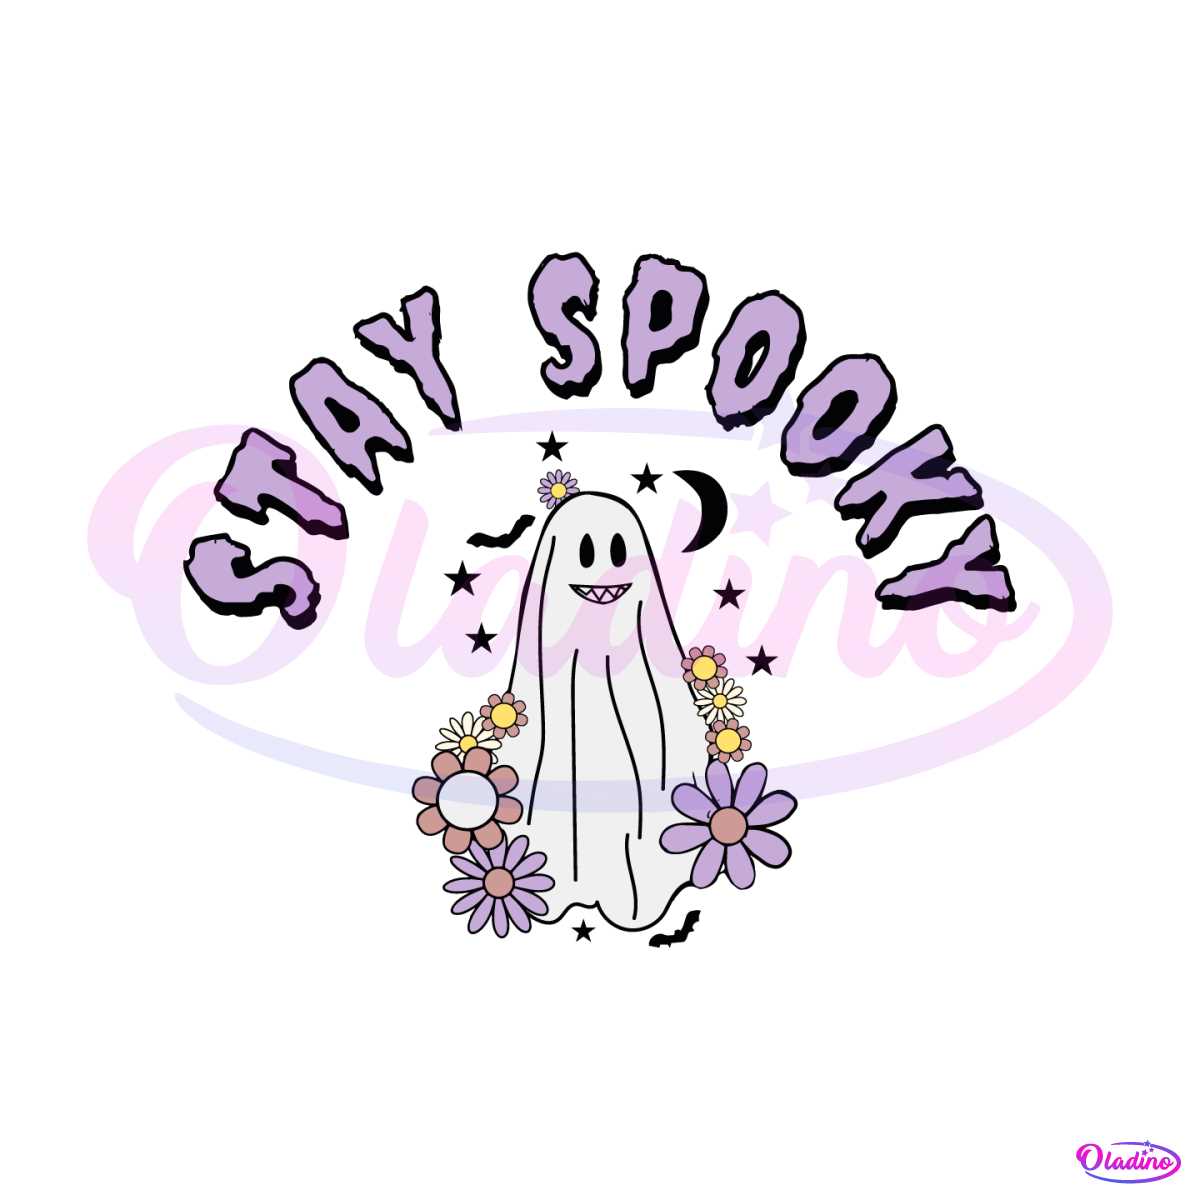 cute-ghost-stay-spooky-halloween-svg-graphic-design-file